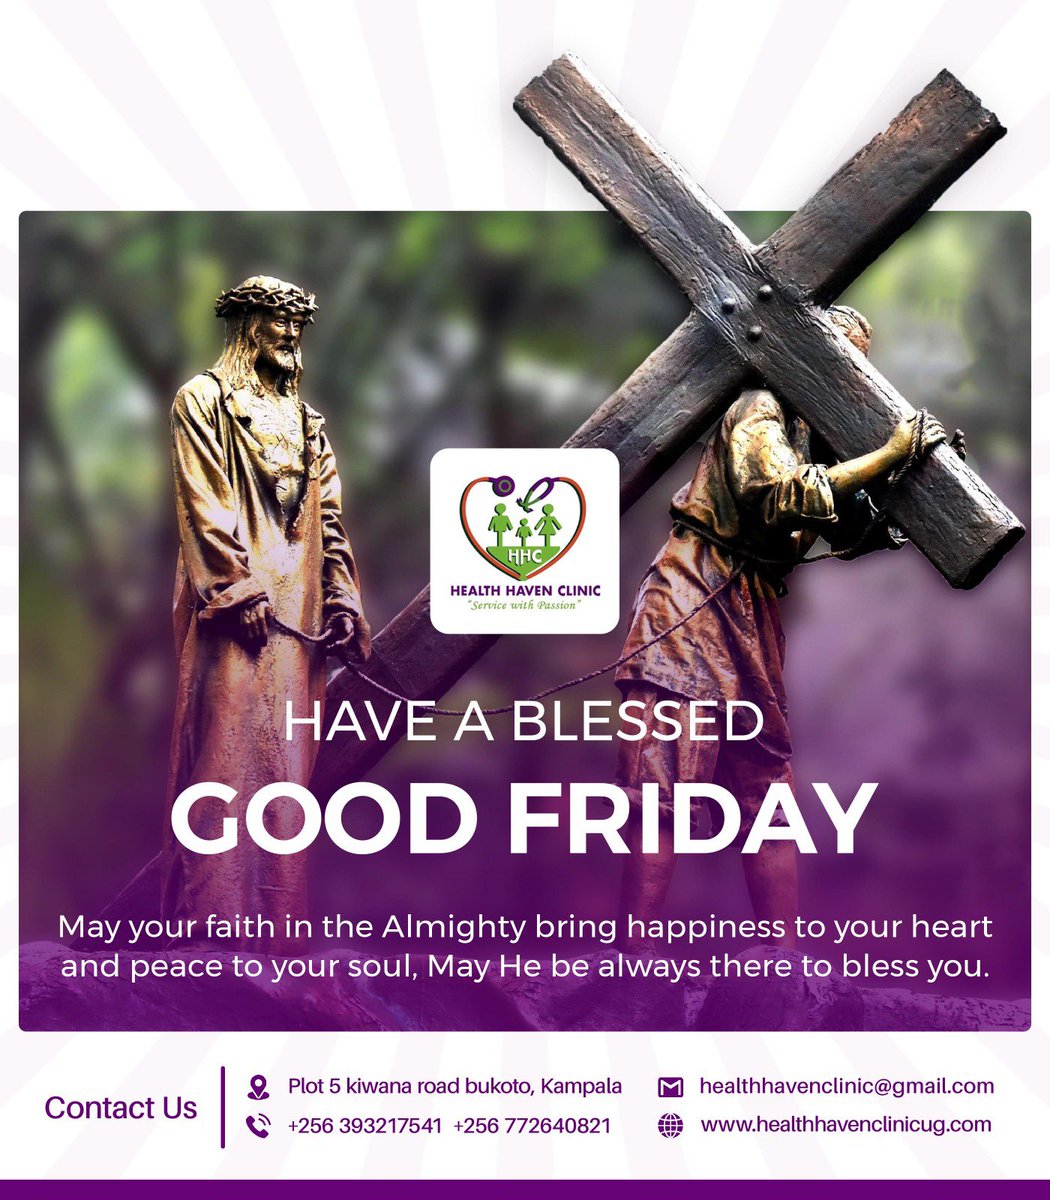 Wishing everyone a peaceful and reflective Good Friday from all of us at Health Haven Clinic. May this day bring you moments of serenity and hope. #HealthHavenClinicUg